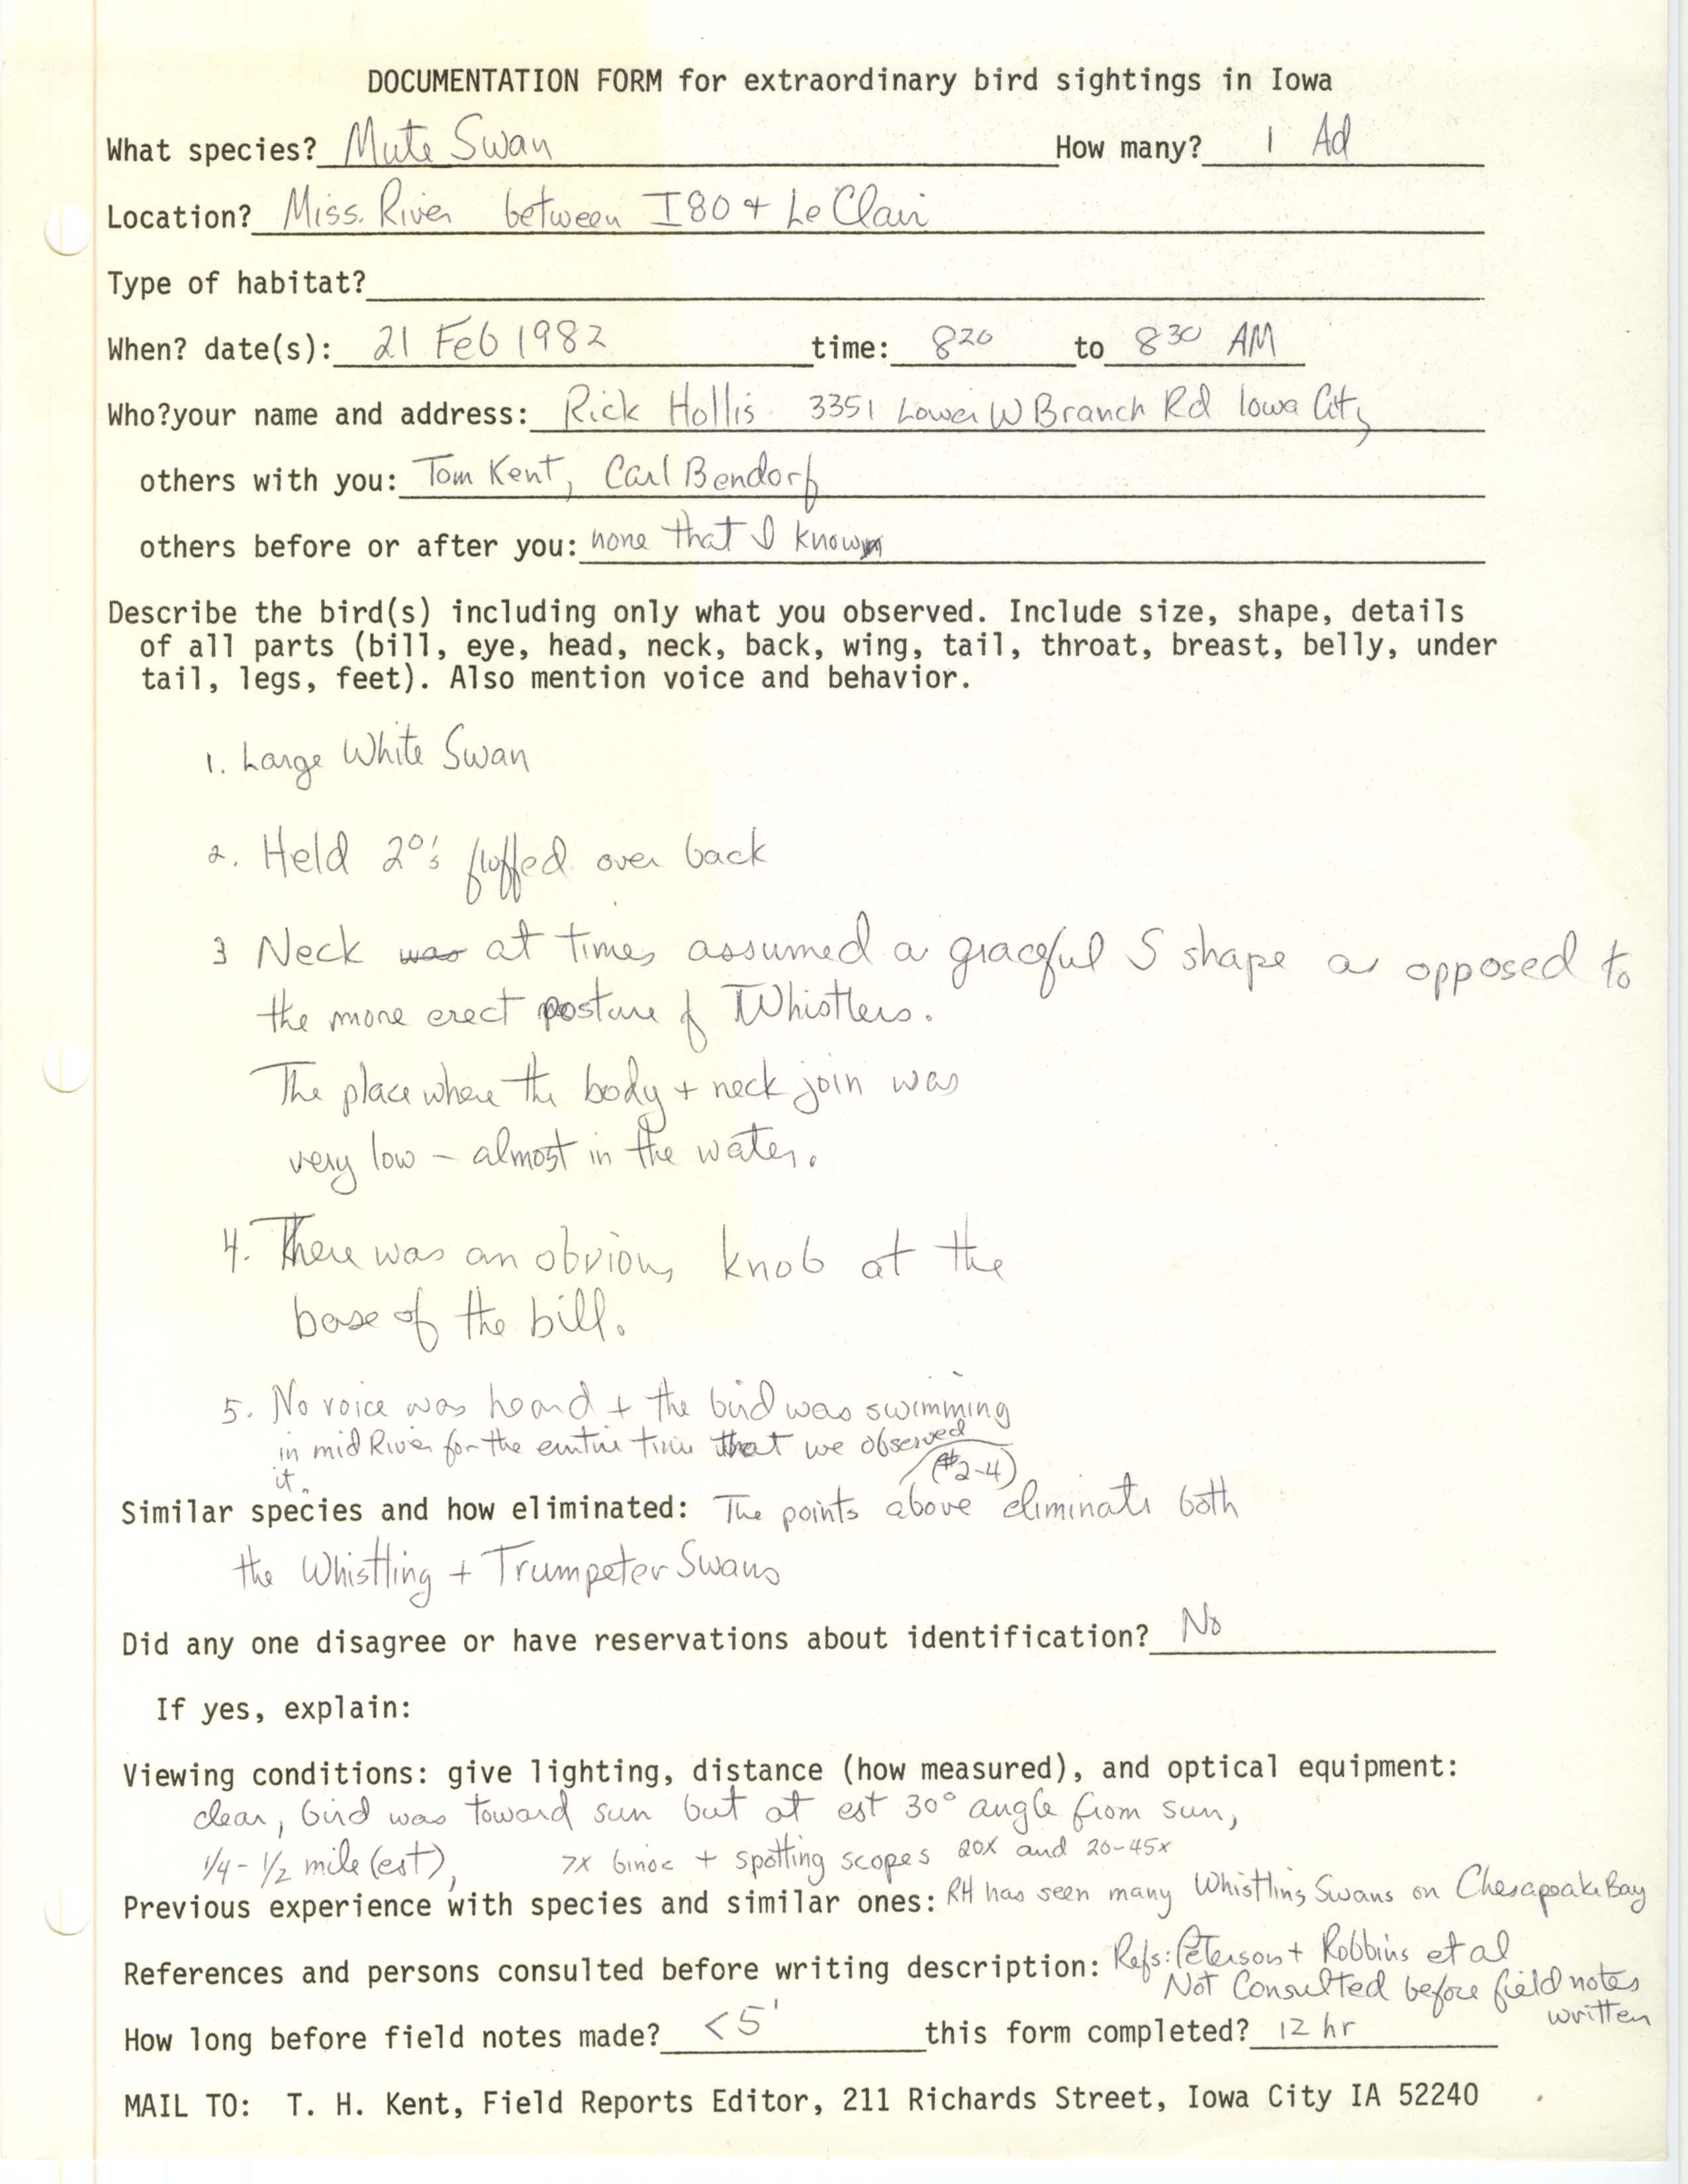 Rare bird documentation form for Mute Swan at the Mississippi River near Le Claire, 1982